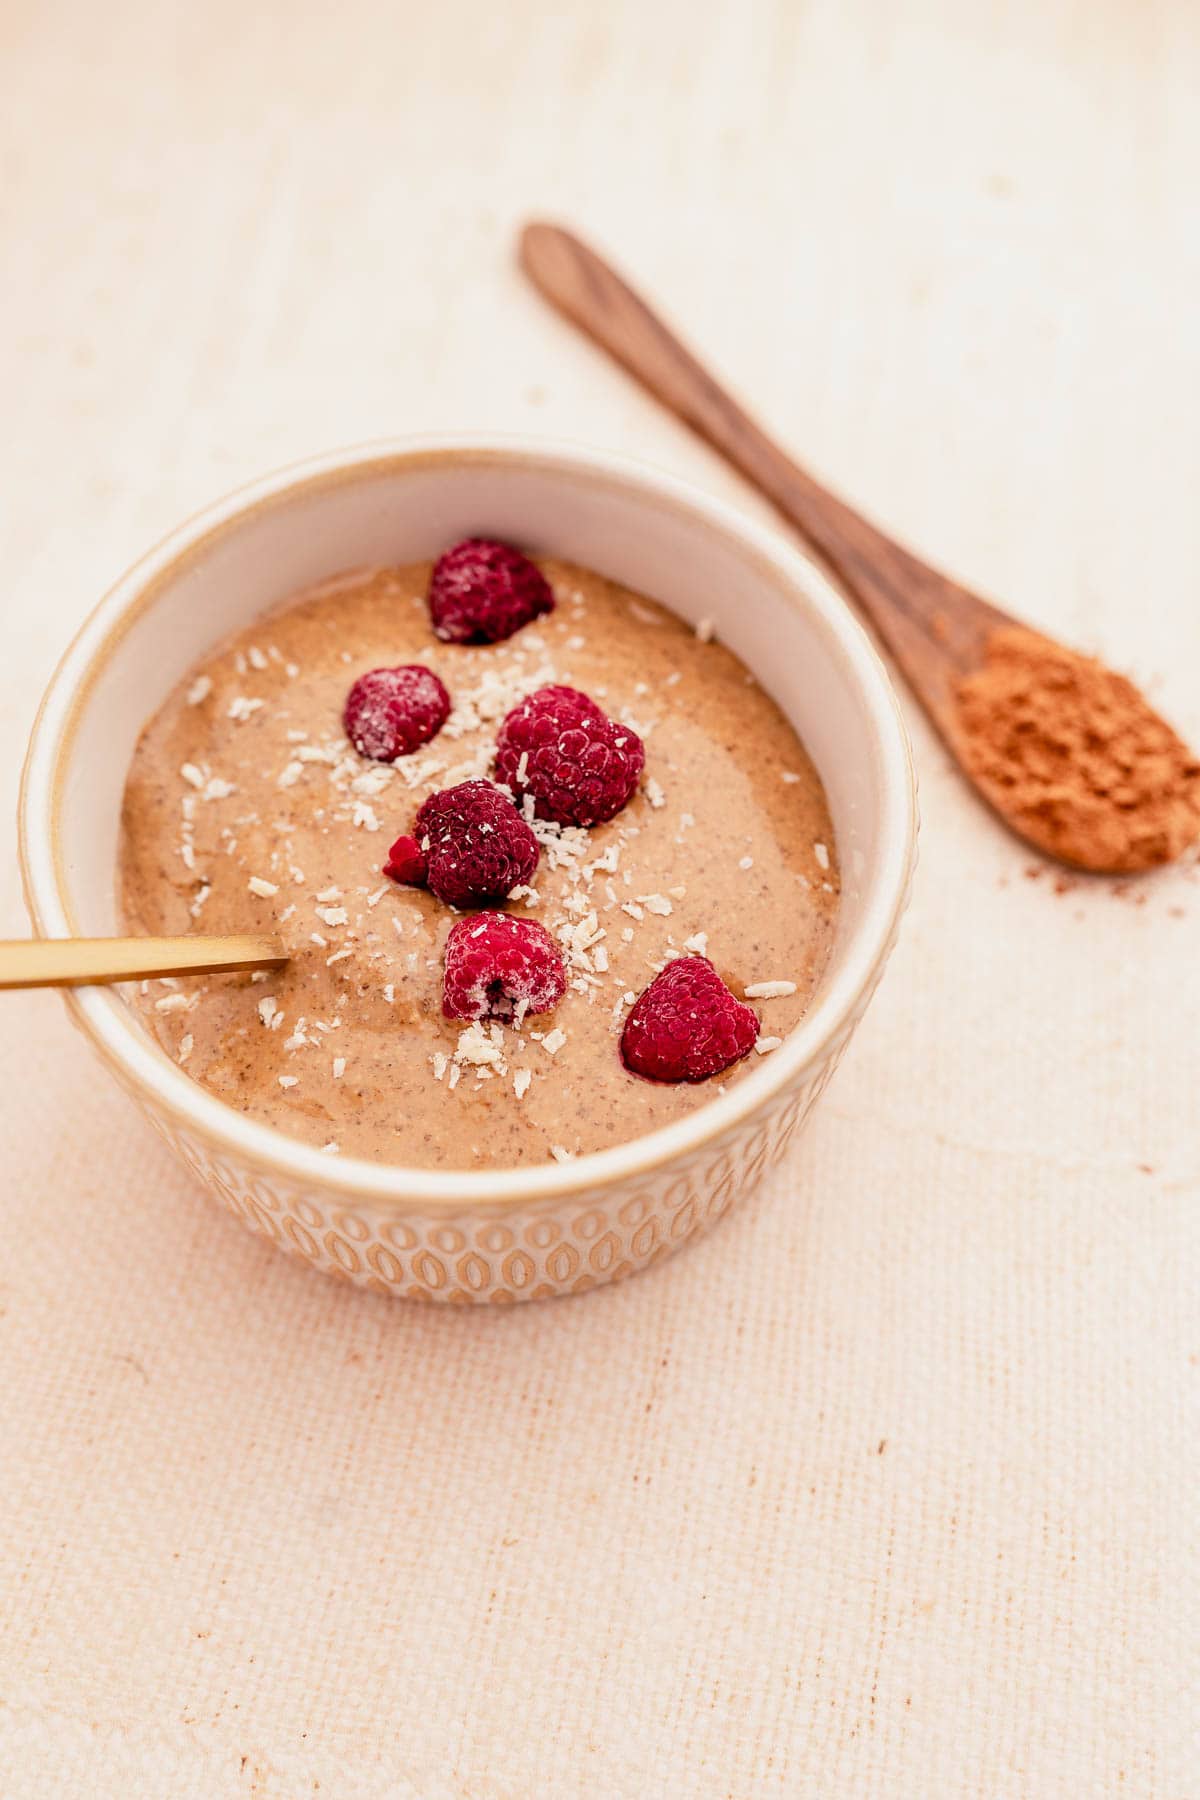 A bowl of oatmeal with raspberries, blended chocolate chia pudding, and a spoon.